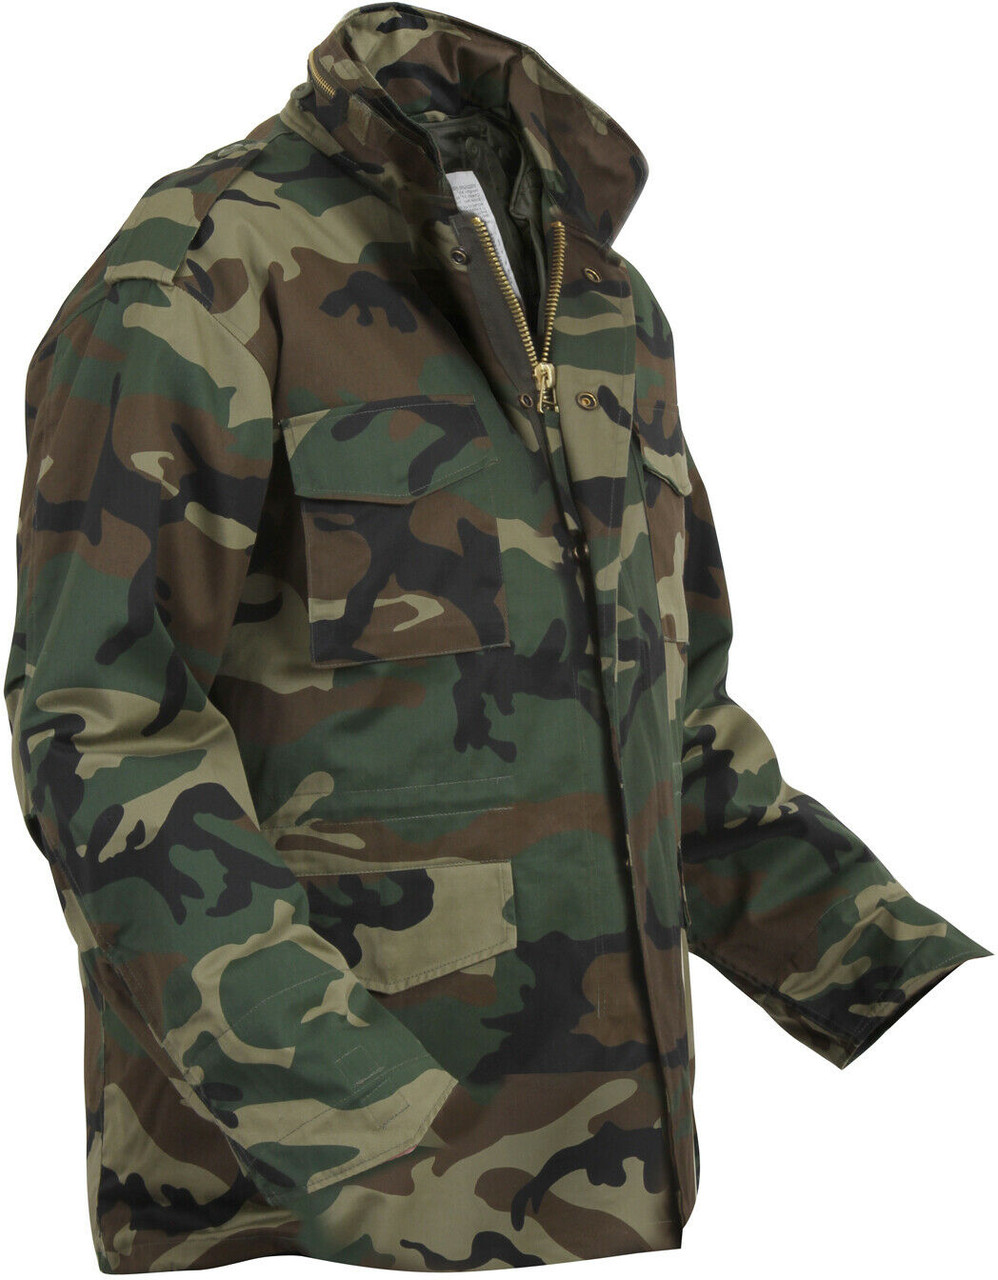 CAMPUS SUTRA Full Sleeve Camouflage Men Jacket - Buy CAMPUS SUTRA Full  Sleeve Camouflage Men Jacket Online at Best Prices in India | Flipkart.com